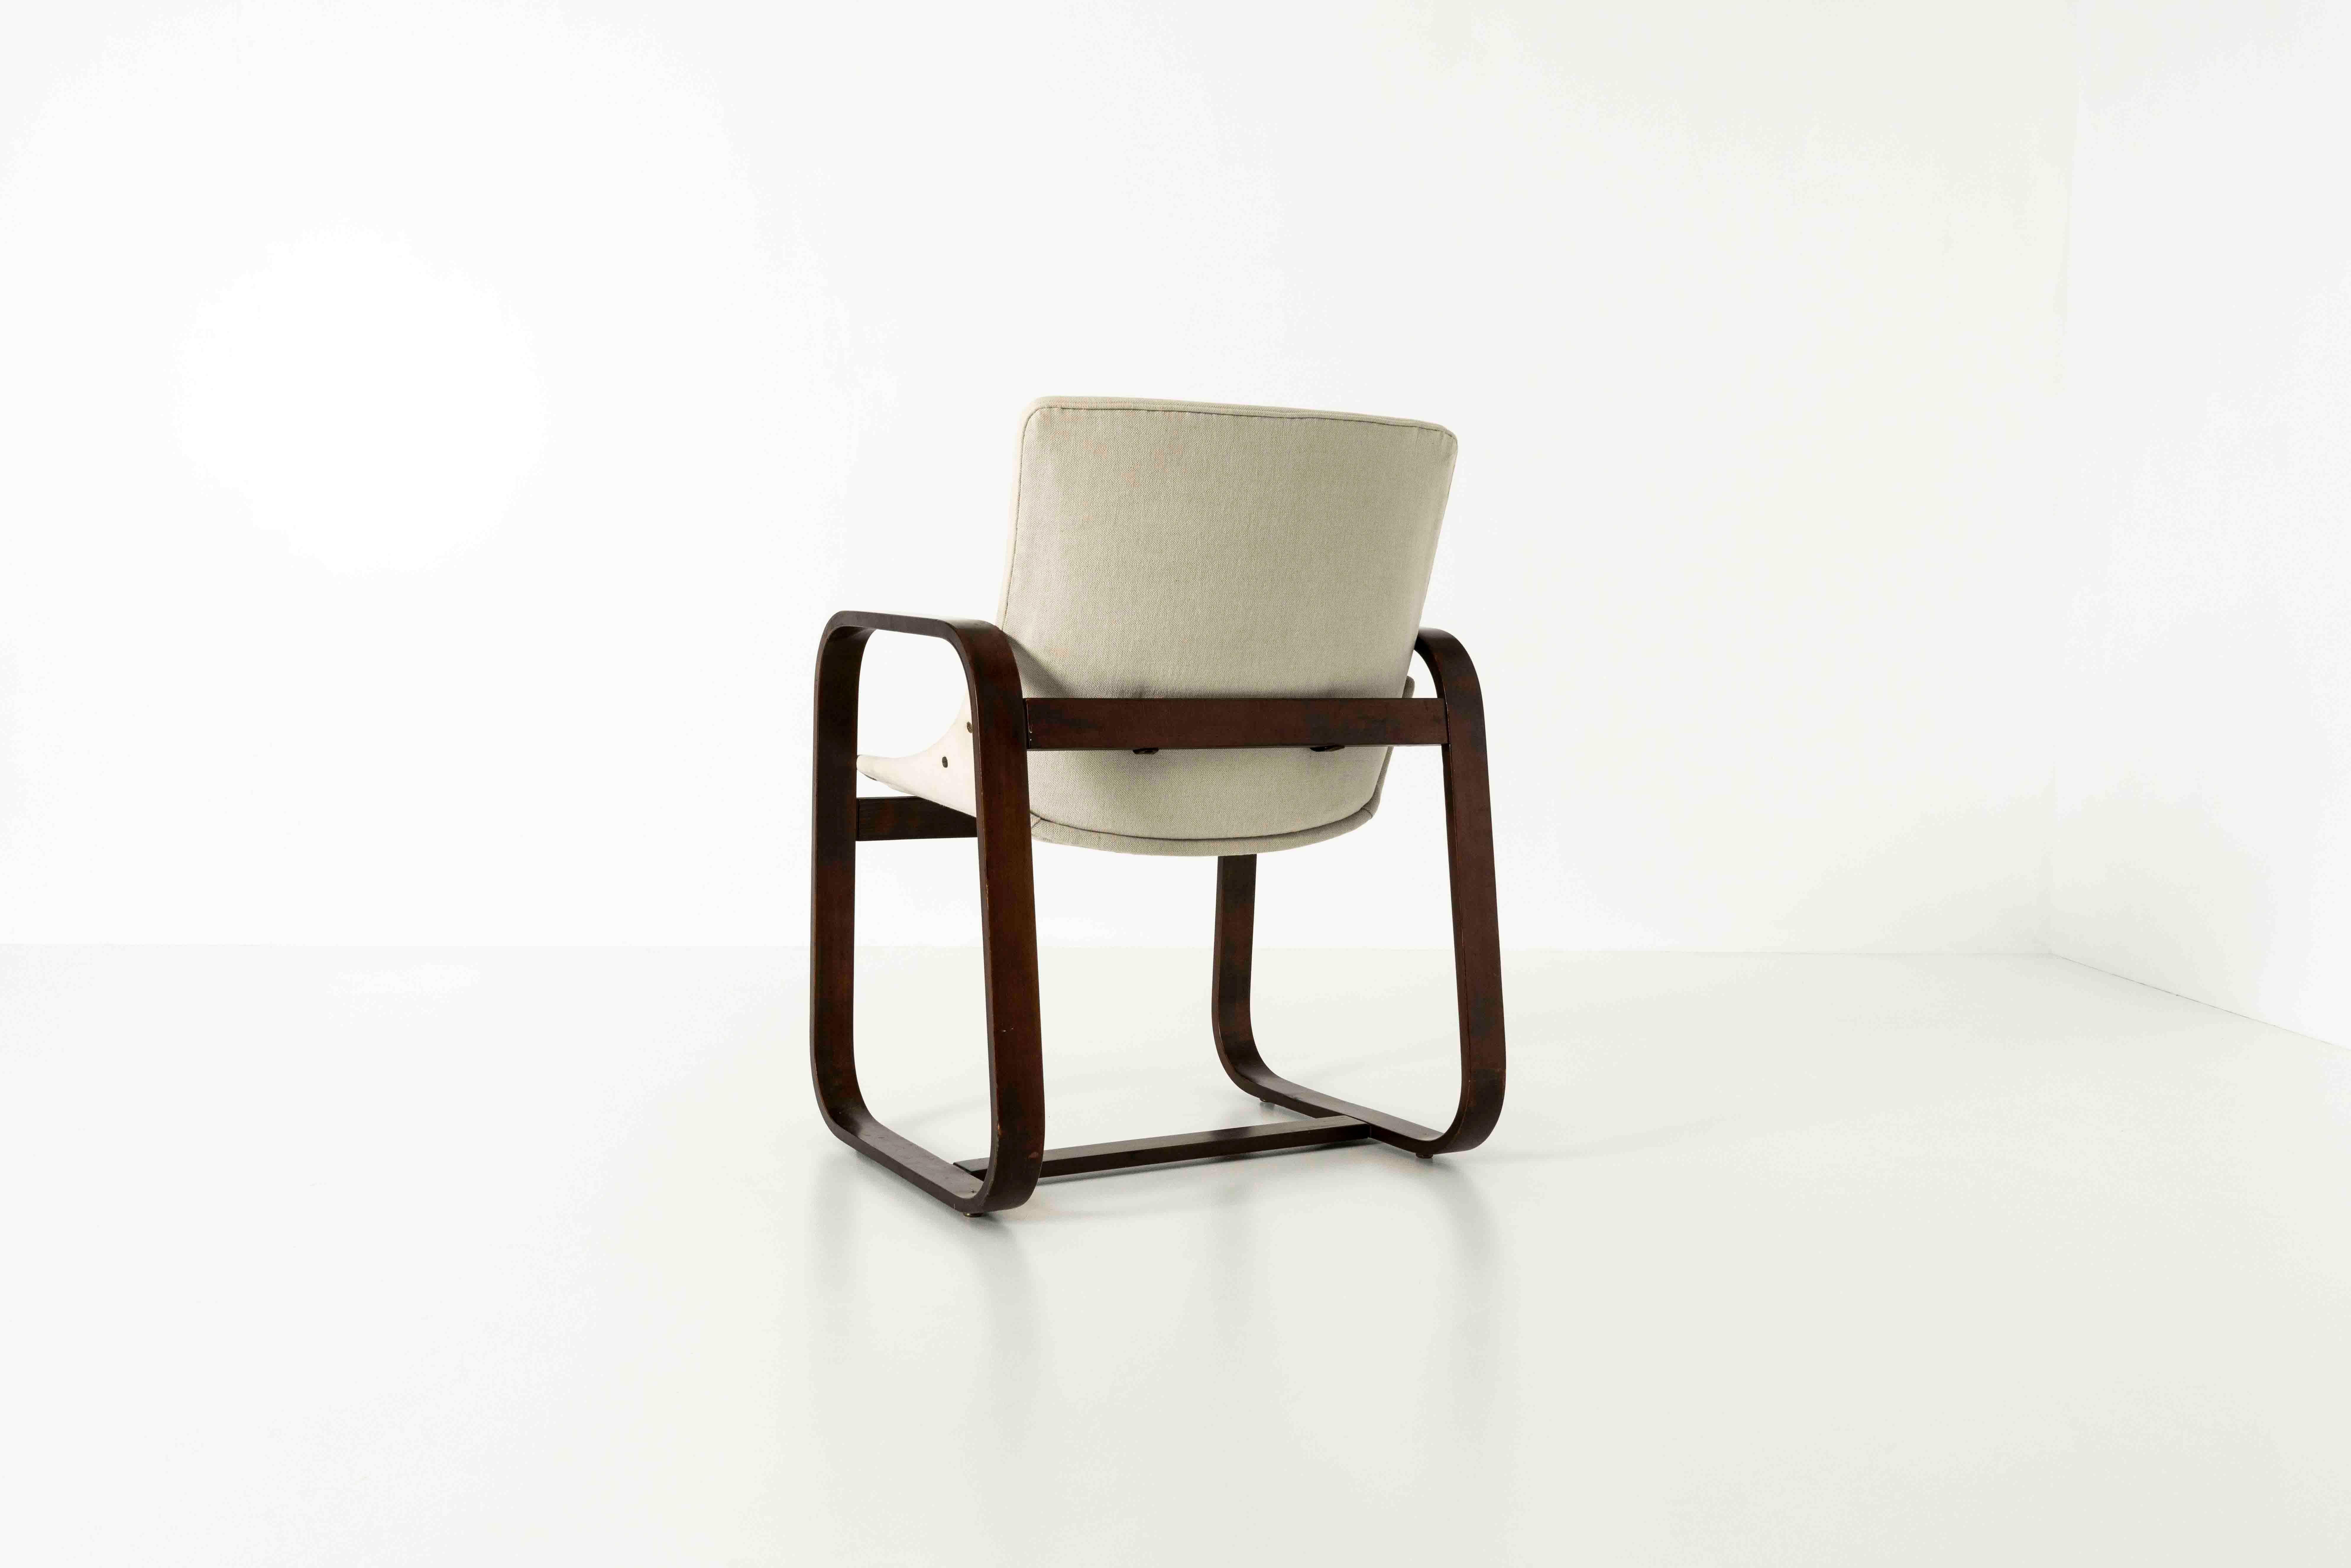 Rare armchair by Giuseppe Pagano Pogatschnig and Gino Maggioni, circa 1940s. The base consists of two square-shaped sides and the chair's legs. This design is very recognizable from the chairs designed by Giuseppe Pagano and Gino Maggioni in the